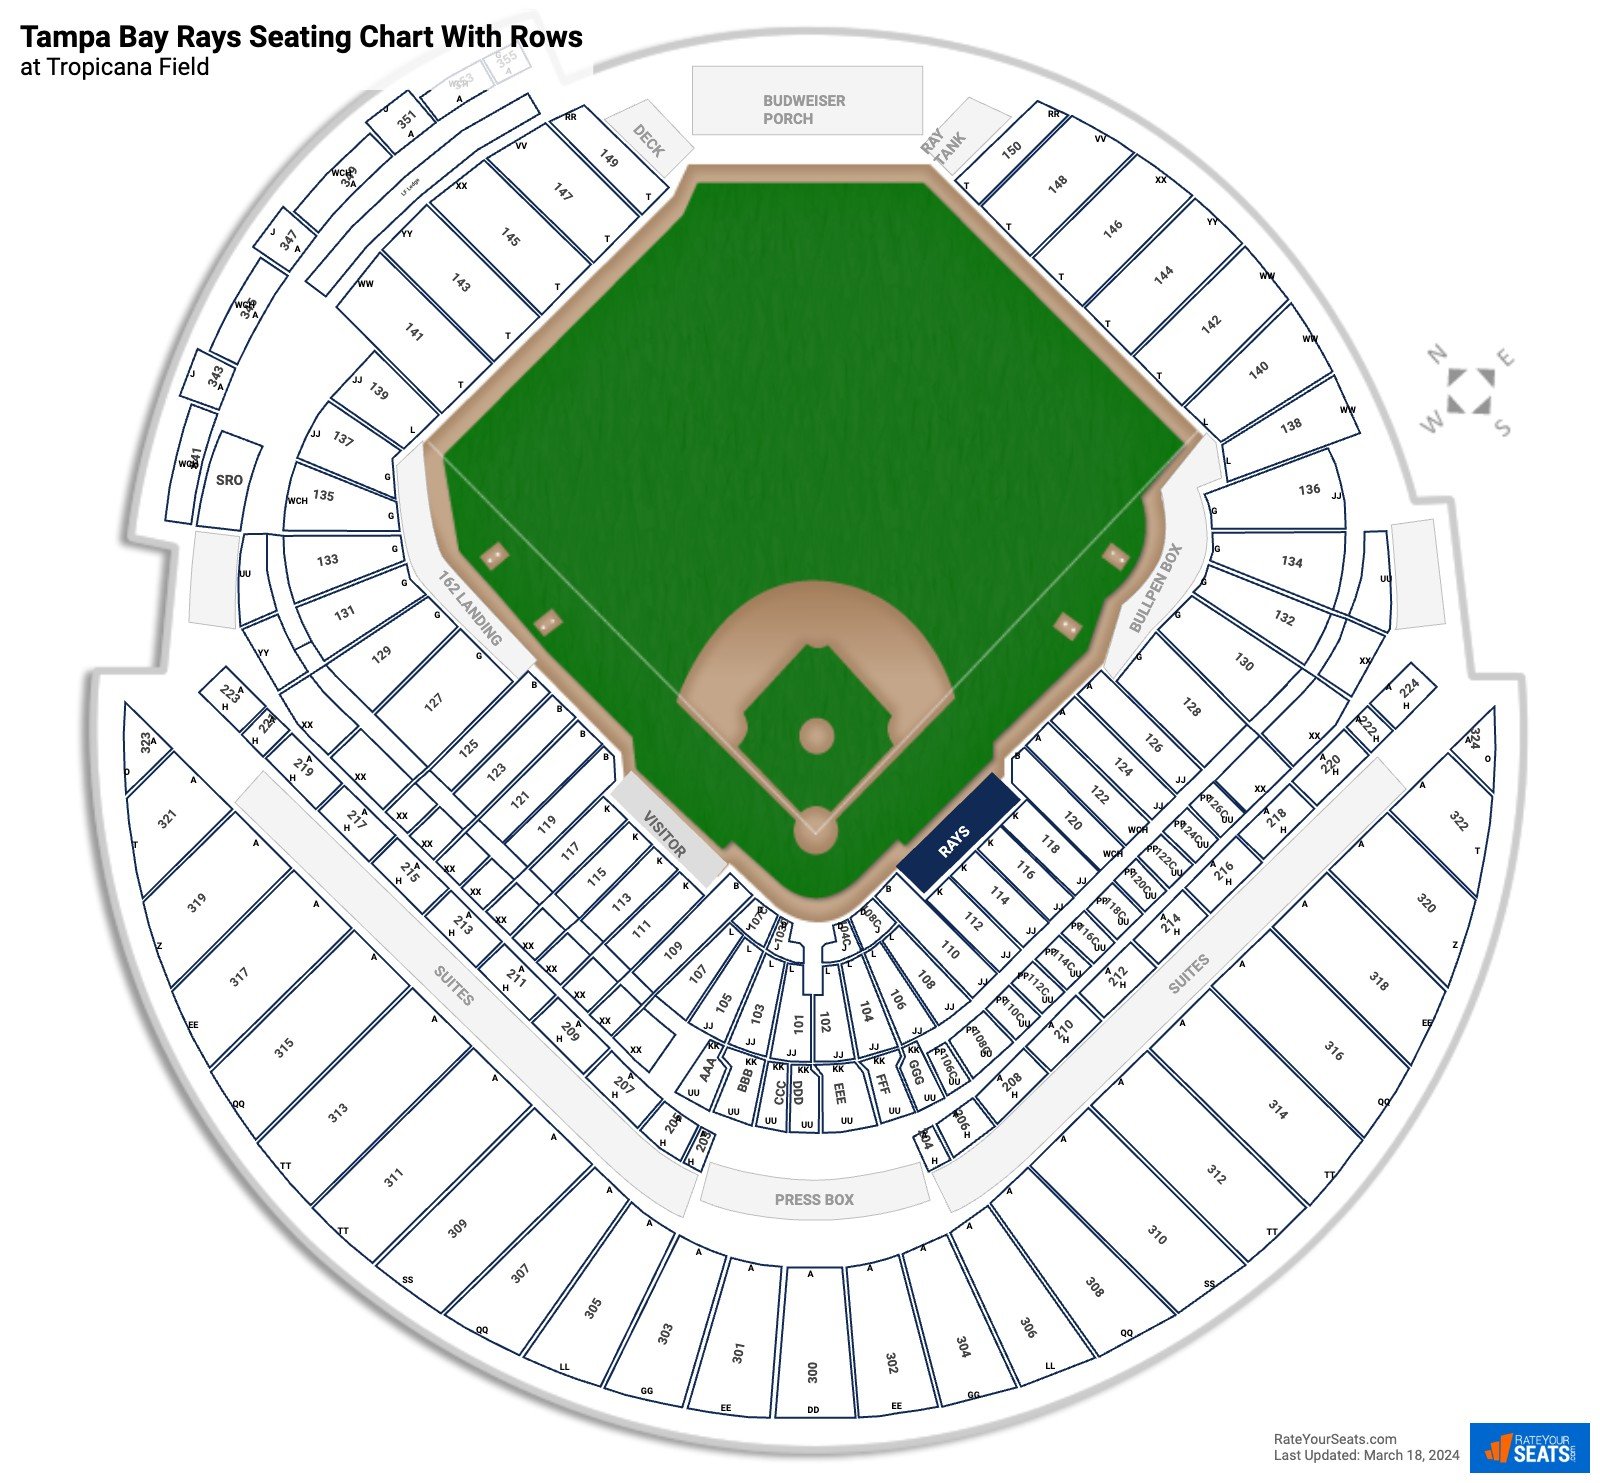 Tropicana Field seating chart with row numbers